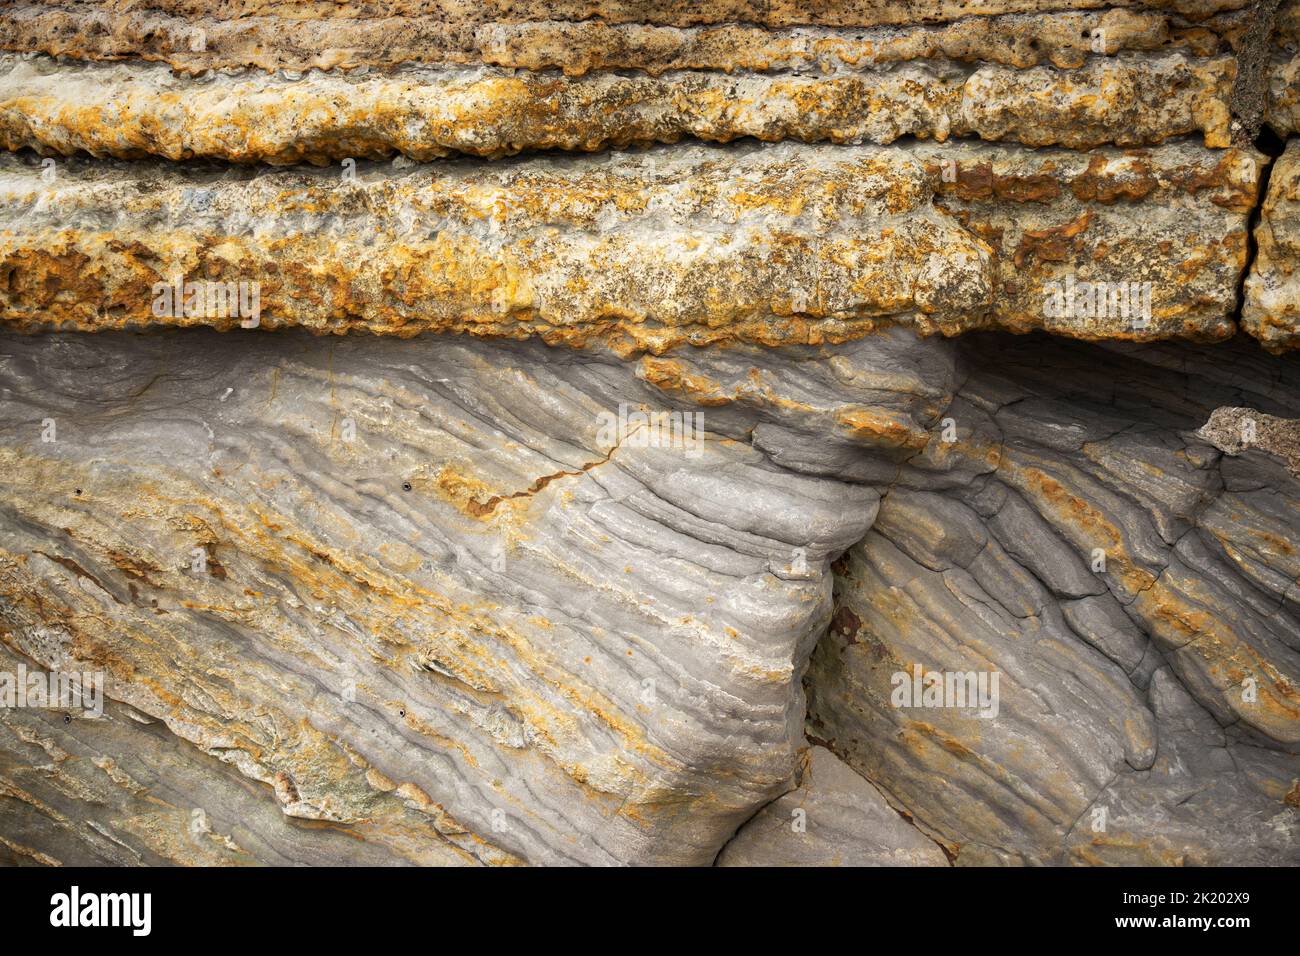 This Jurassic sedimentary strata shows a feature known as an Unconformity. The underlying darker mudstones have been titled and then the overlain Stock Photo